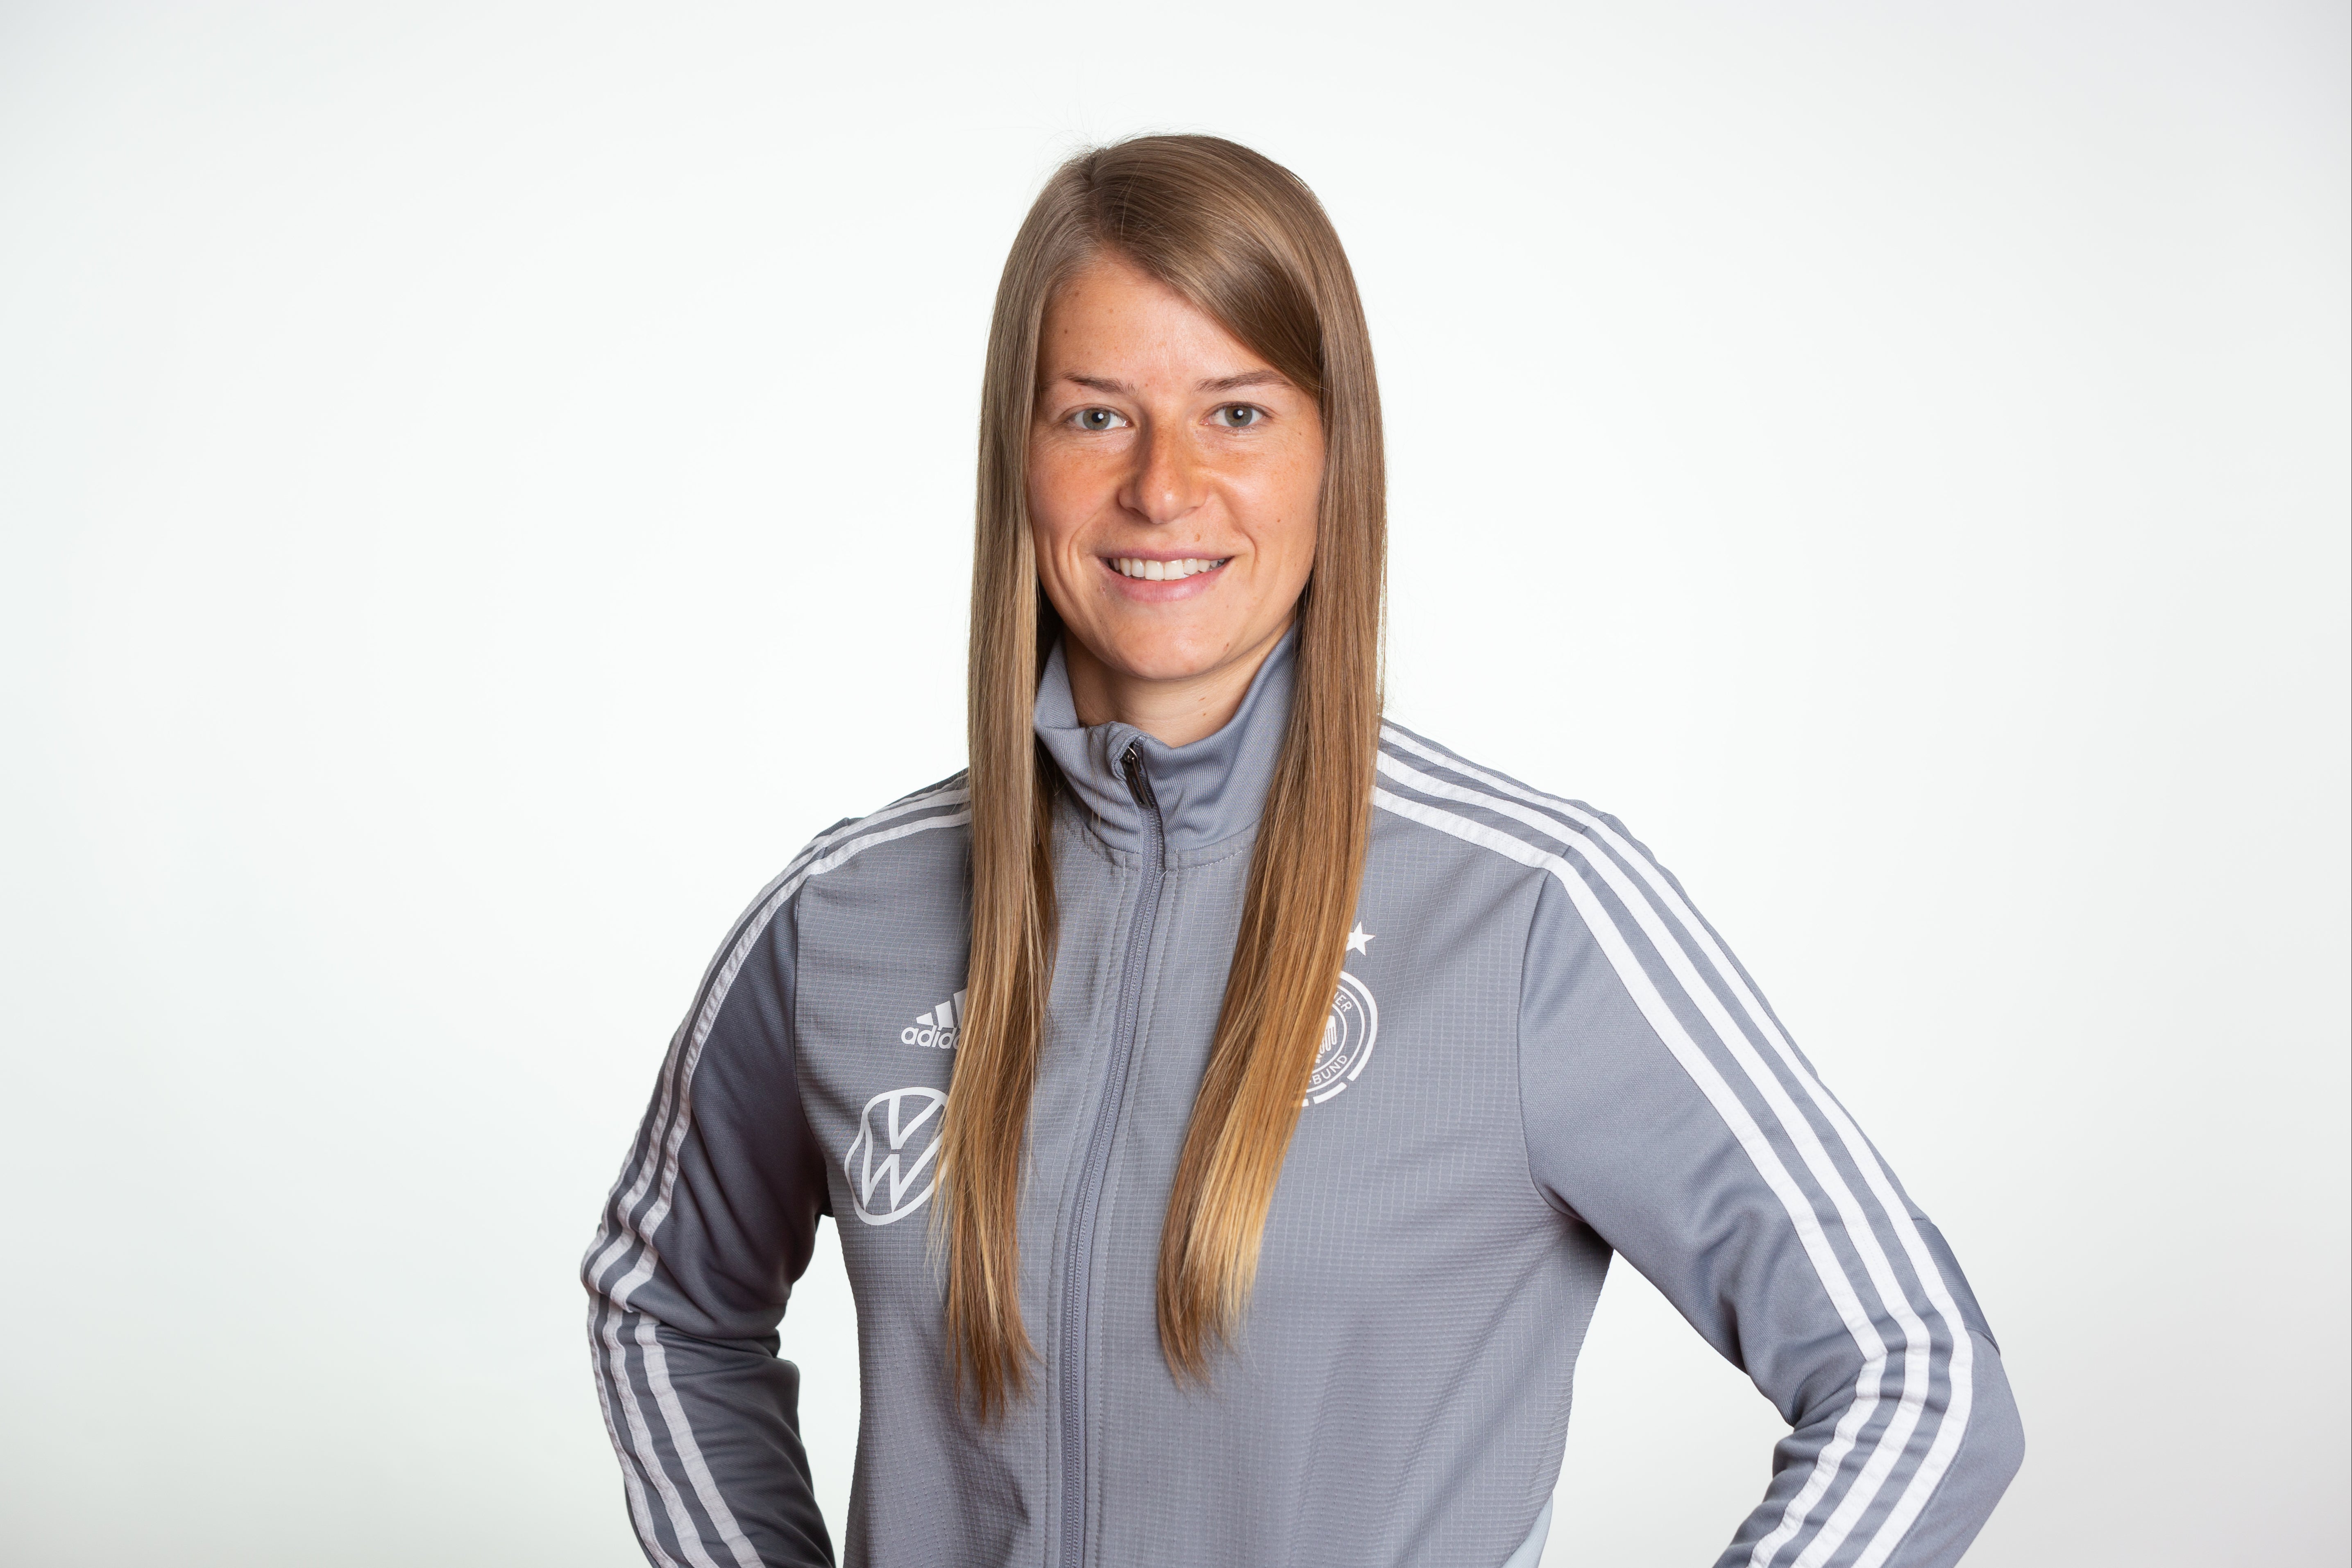 Marie-Louise Eta is an assistant with Union Berlin